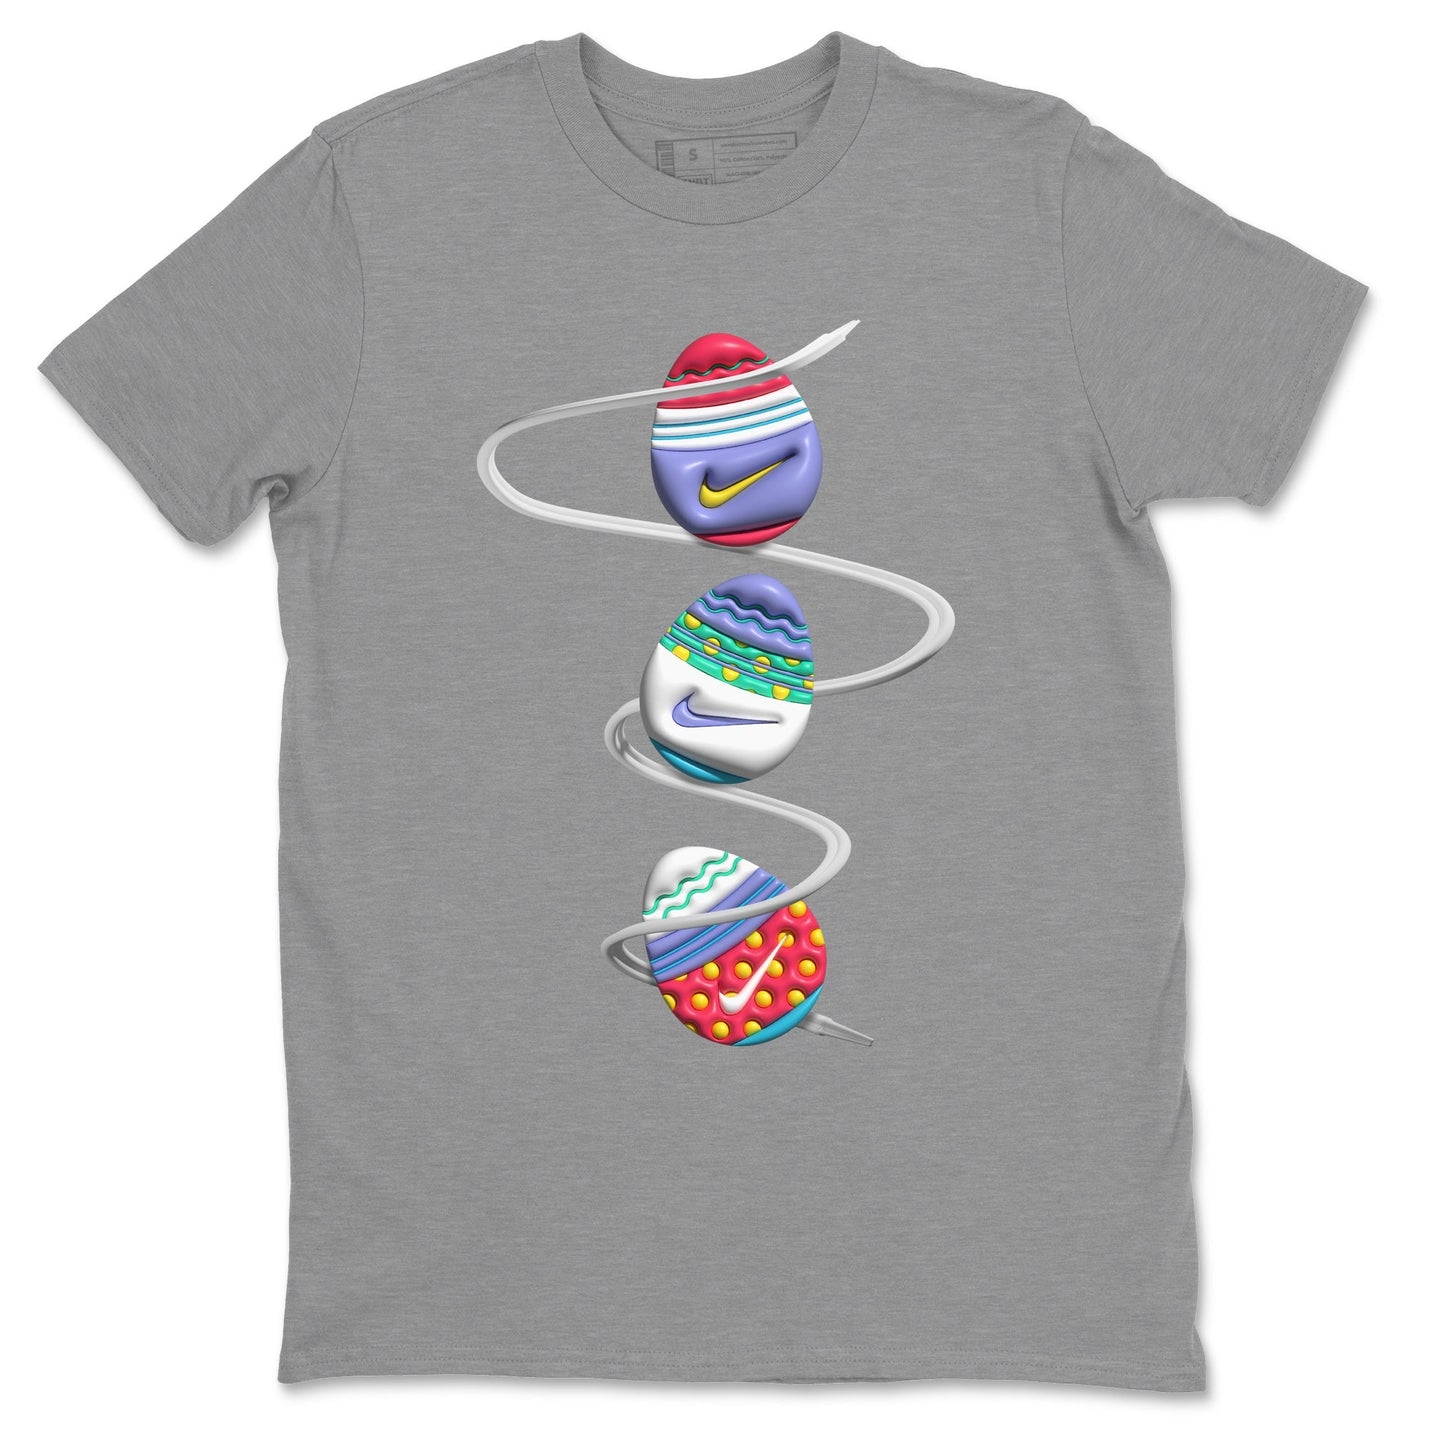 Dunk Easter Candy Sneaker Tees Drip Gear Zone 3D Easter Eggs Sneaker Tees Nike Easter Shirt Unisex Shirts Heather Grey 2